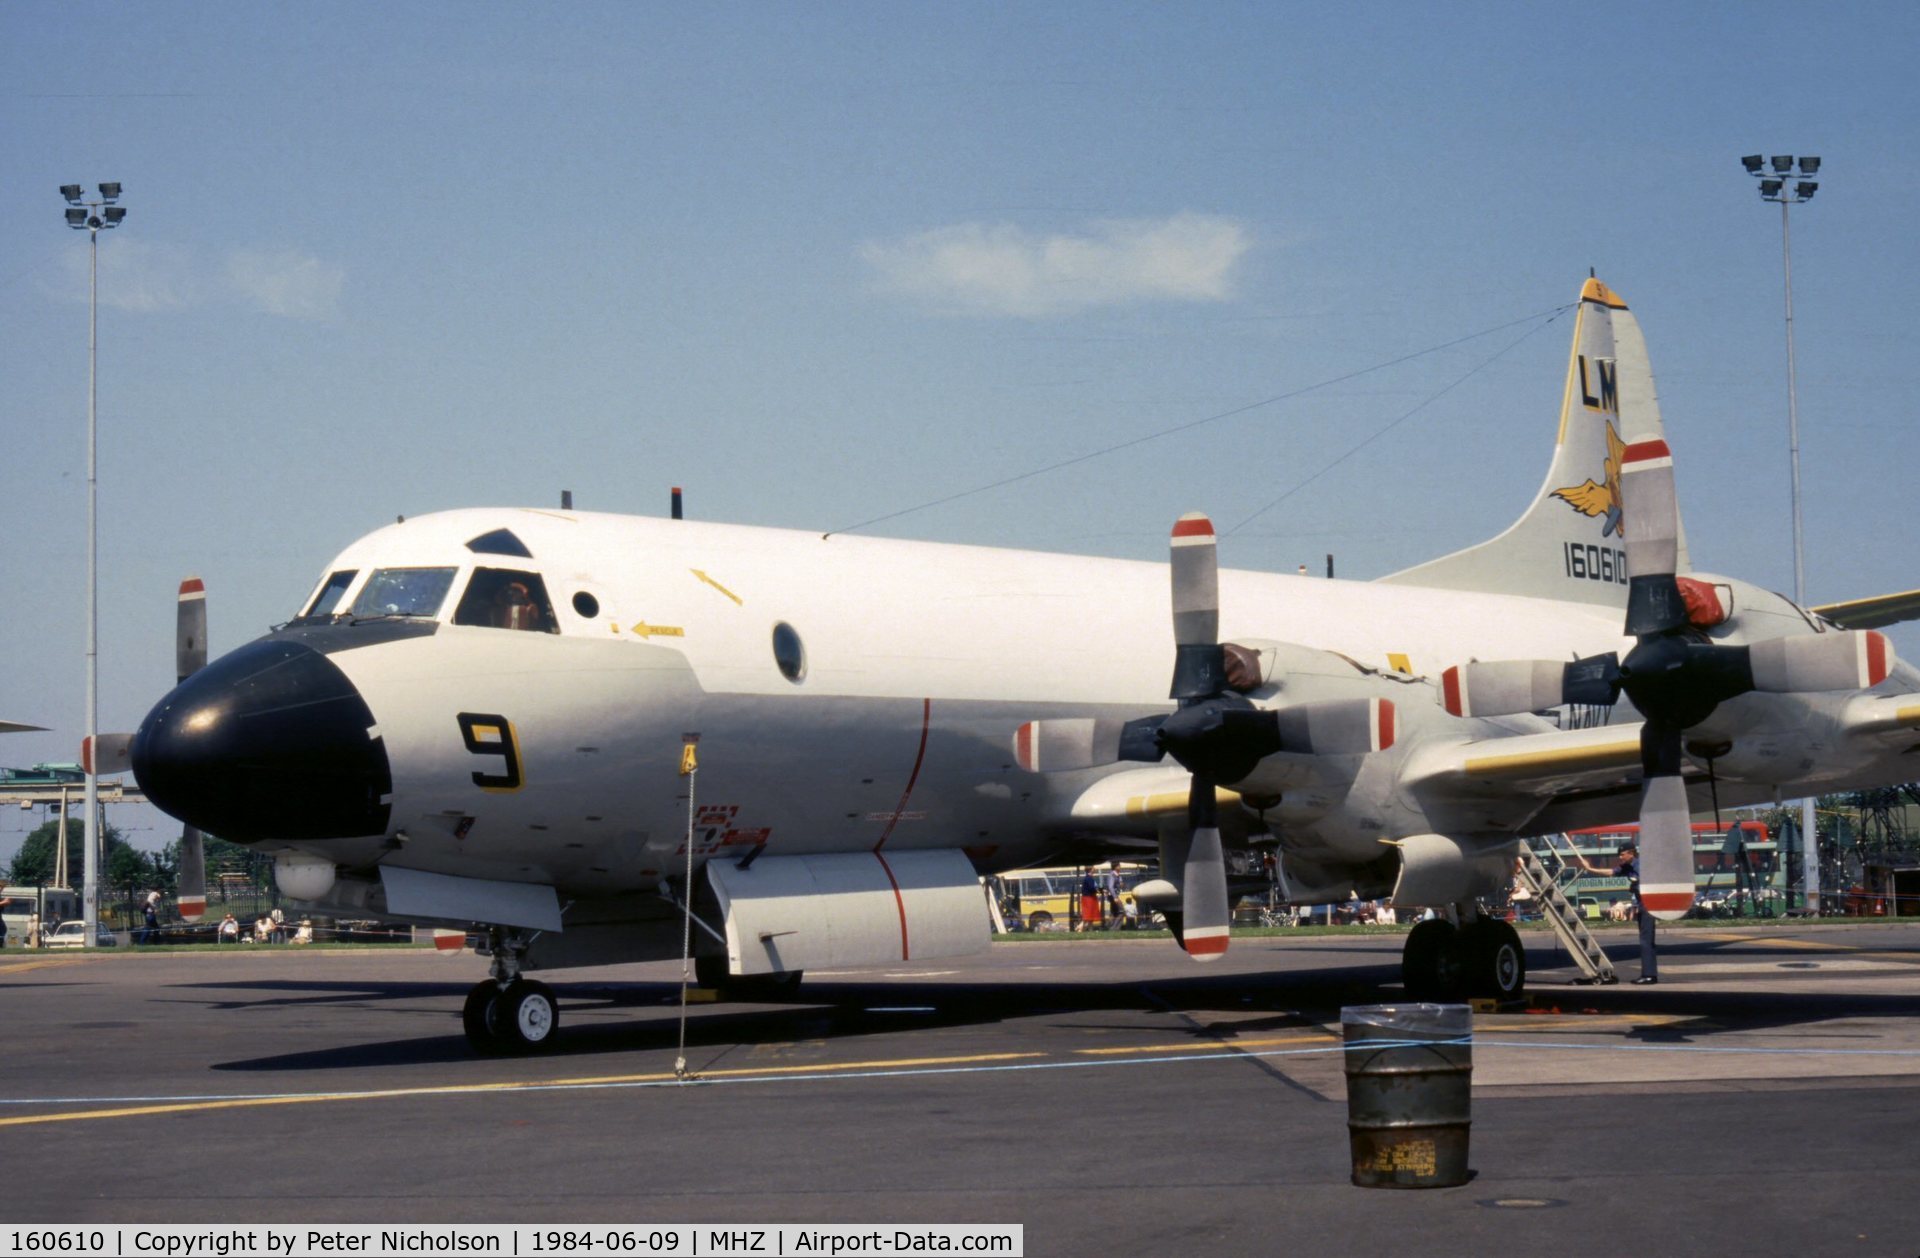 160610, Lockheed P-3C Orion C/N 285A-5659, P-3C Orion of Squadron VP-44 at the 1984 RAF Mildenhall Air Fete.